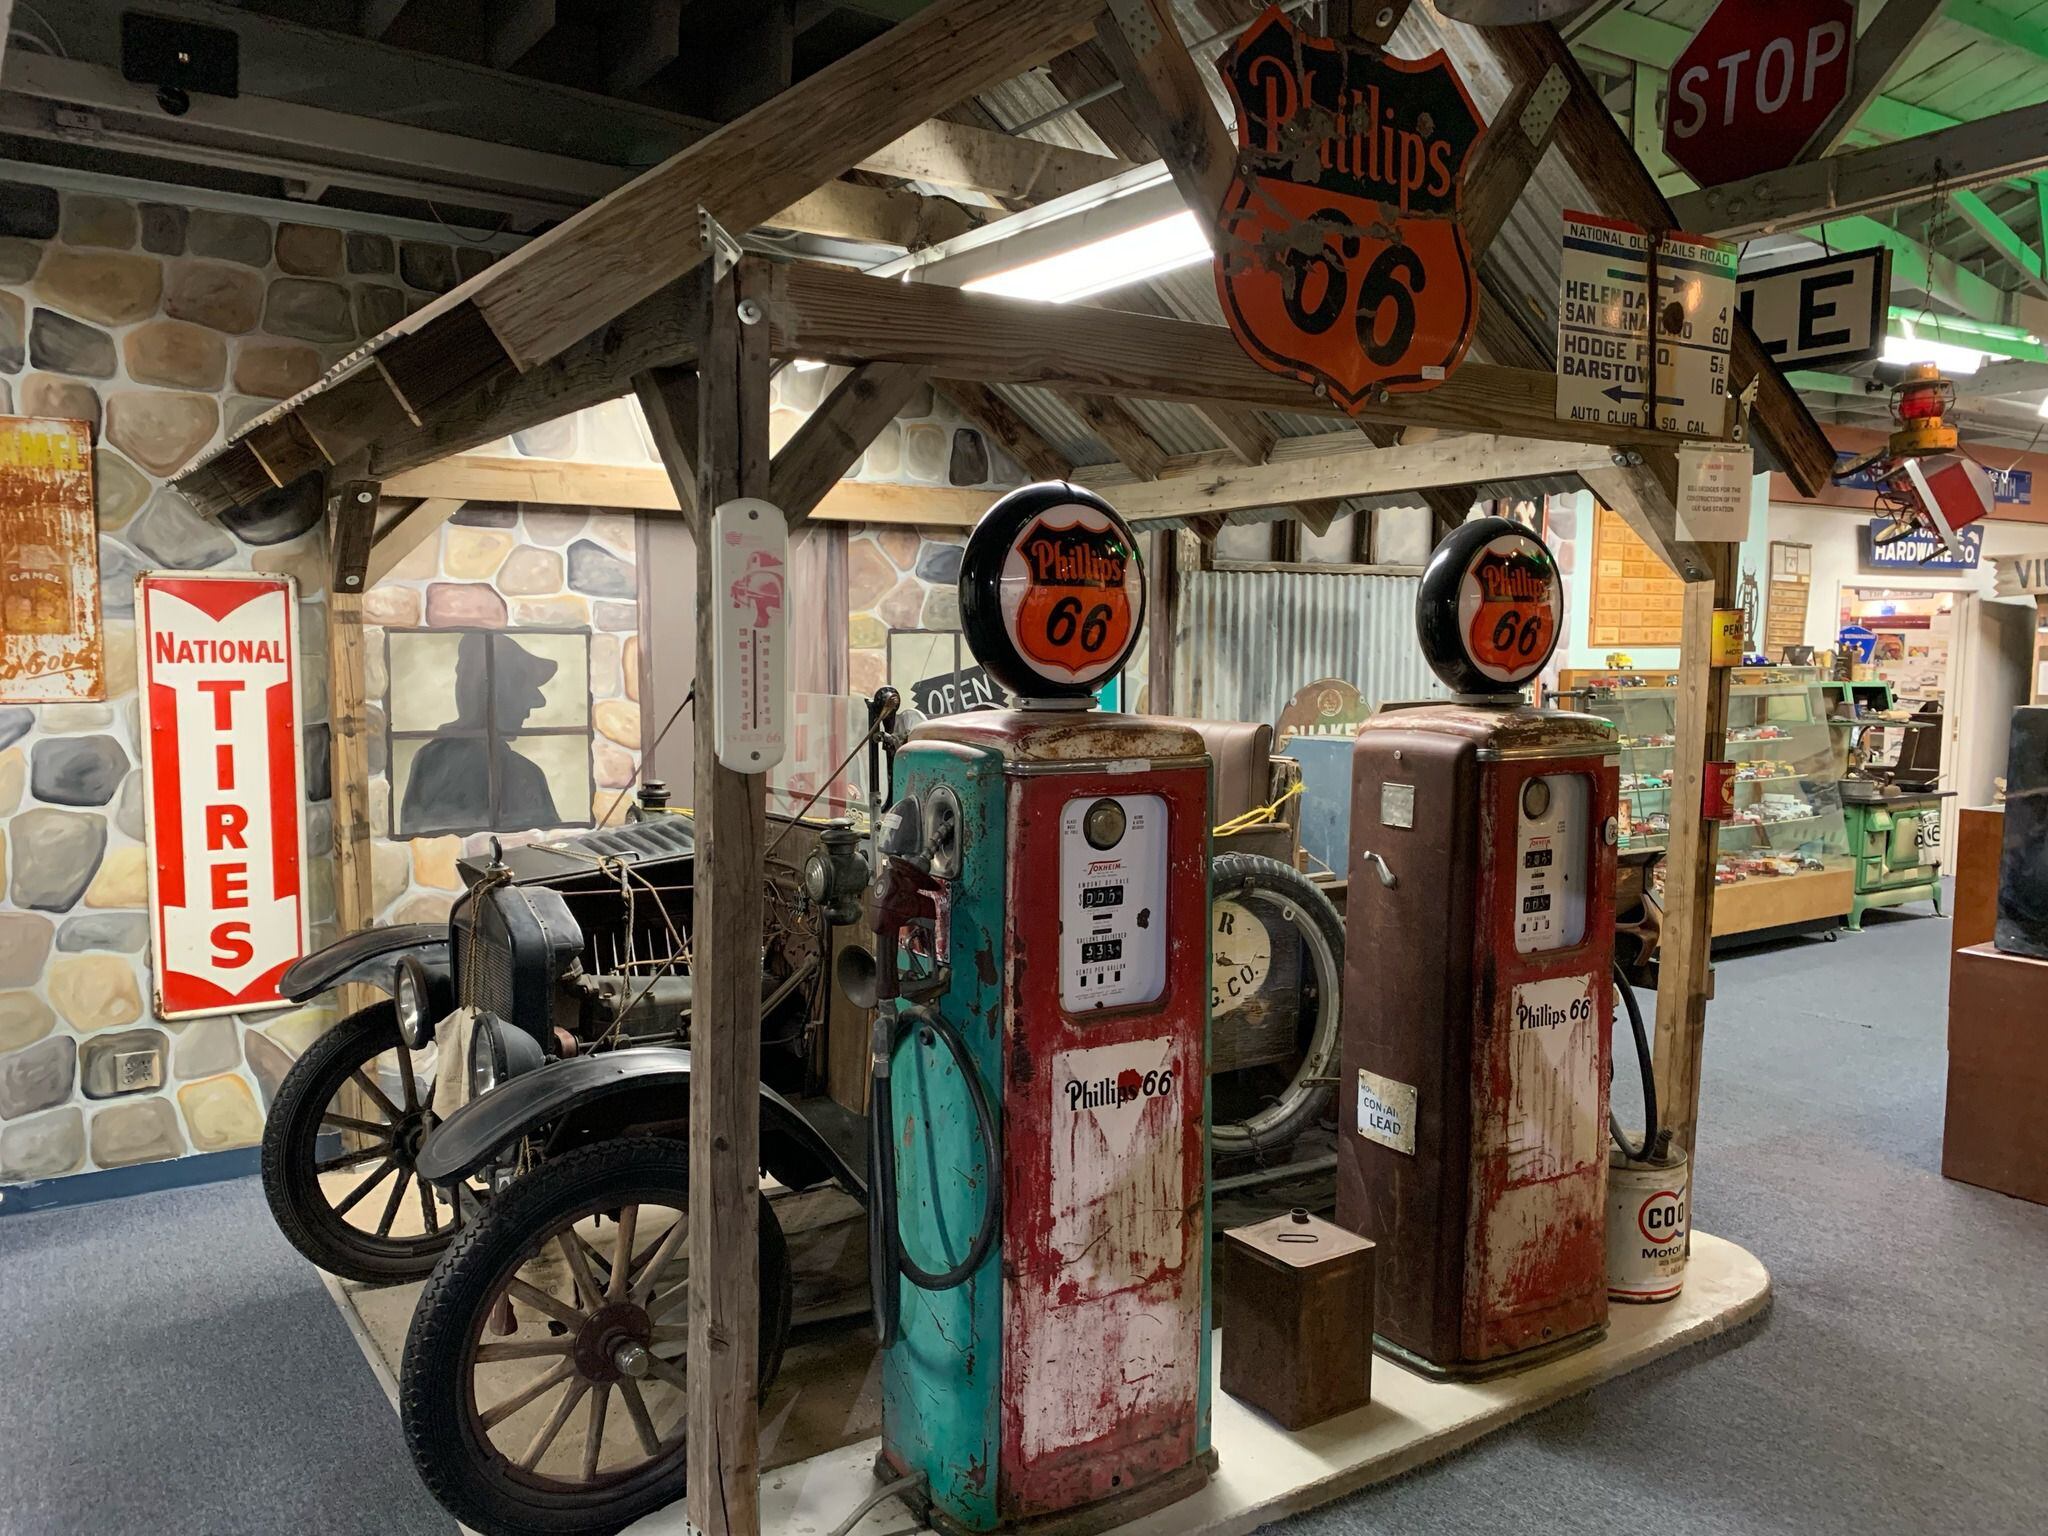 The California Route 66 Museum in Victorville is full of Mother Road memorabilia and photo-ops.